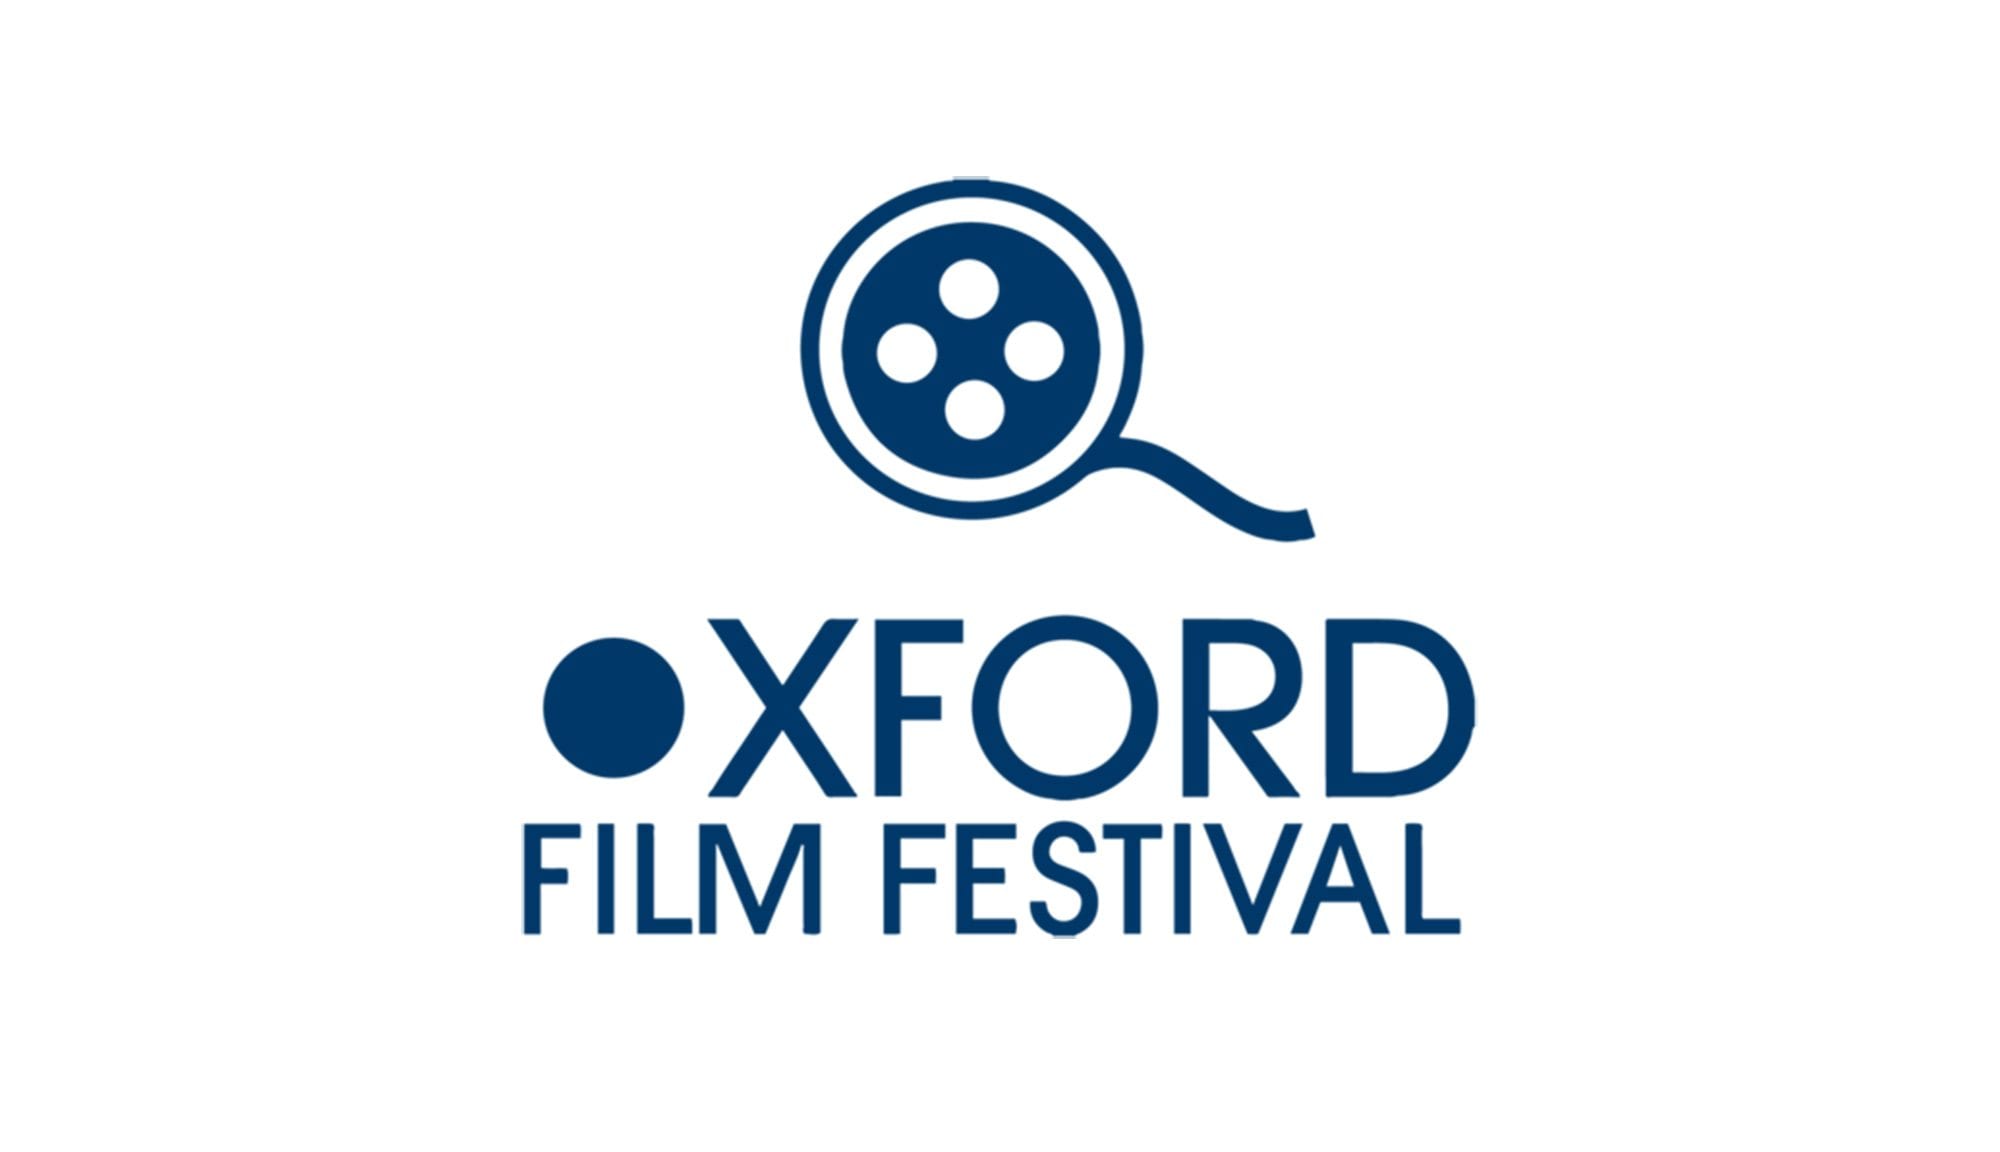 The Oxford Film Festival celebrated its 15th birthday this year with its five-day event dedicated to the art of independent film. The event unites filmmakers & filmgoers from around the world to enjoy five days of workshops, panels, and parties, while offering screenings of movies competing in various categories.